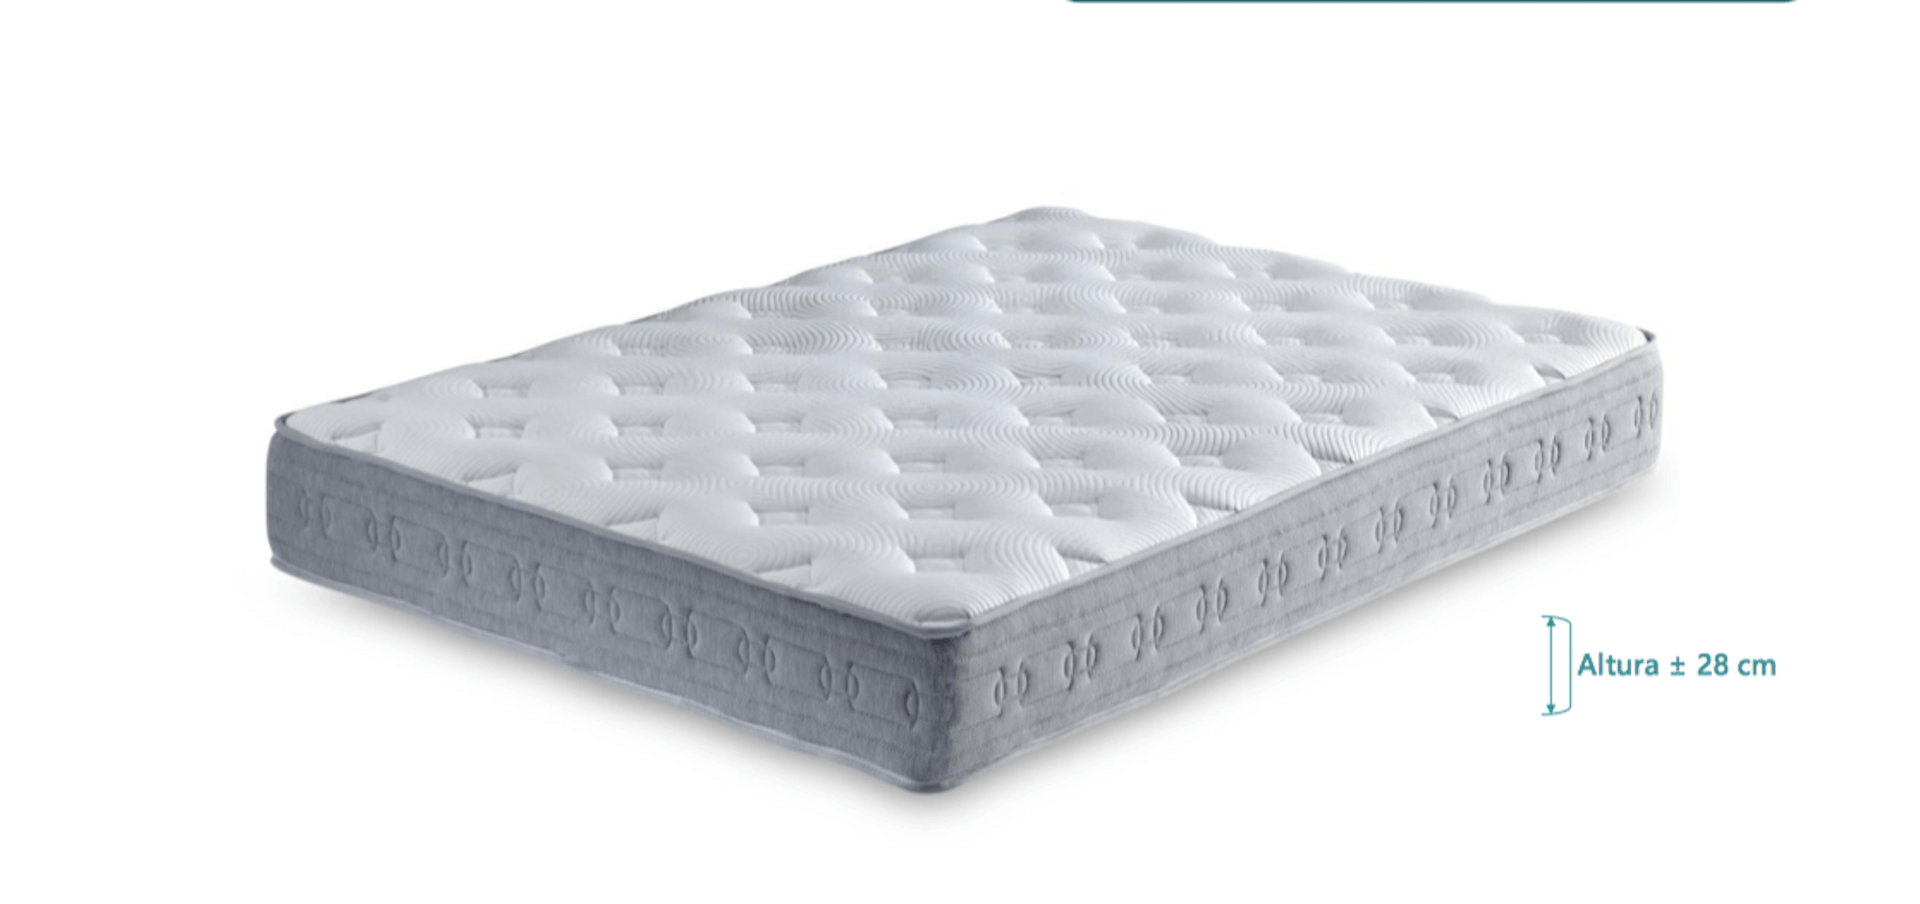 orthosleep products 10 inch amber mattress review